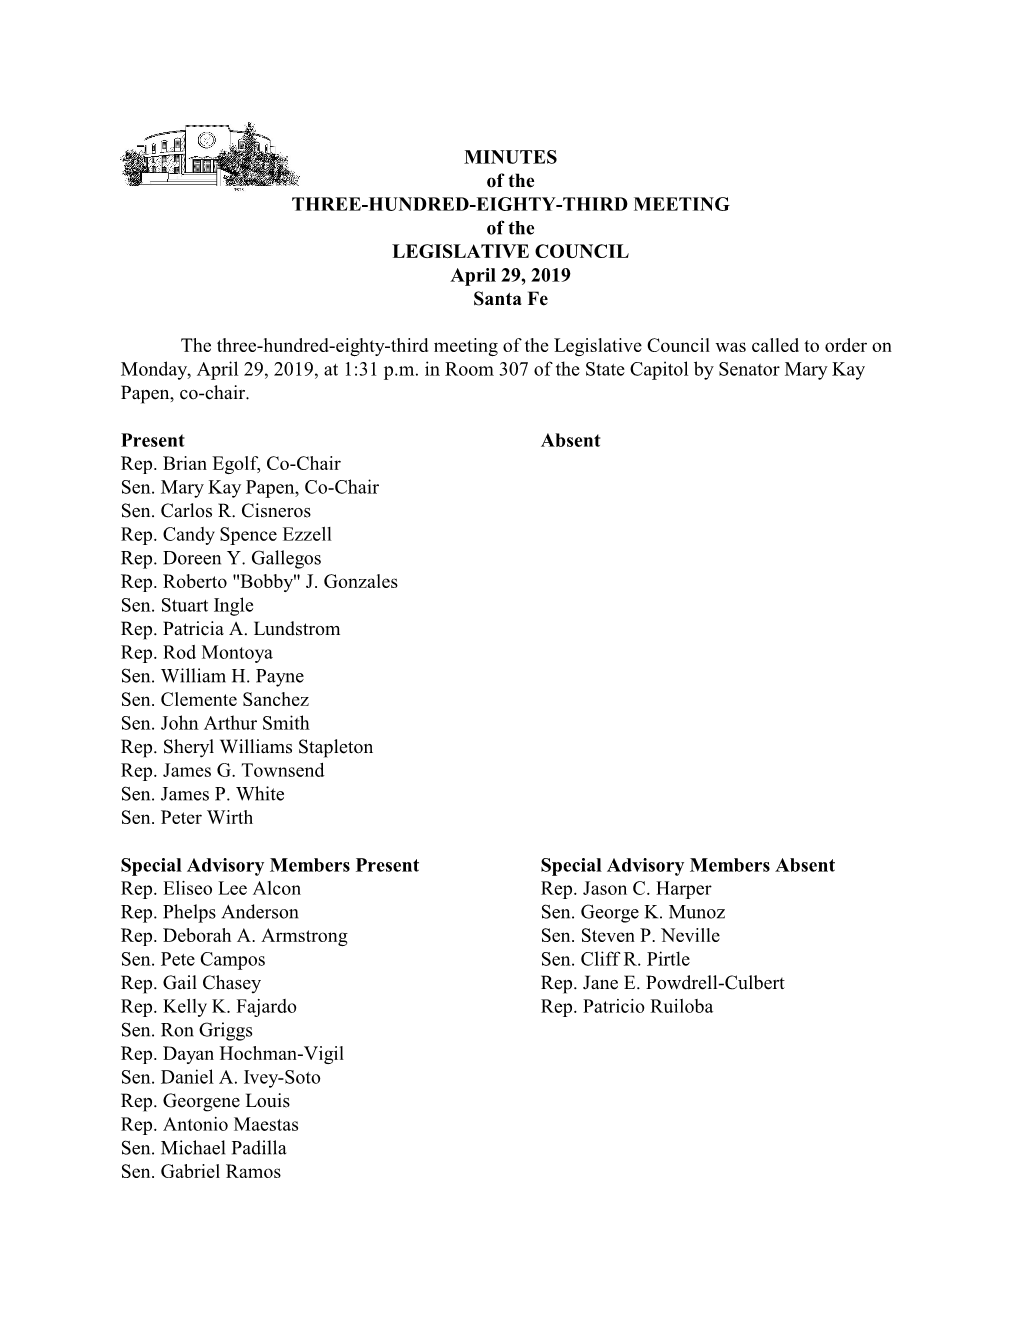 MINUTES of the THREE-HUNDRED-EIGHTY-THIRD MEETING of the LEGISLATIVE COUNCIL April 29, 2019 Santa Fe the Three-Hundred-Eighty-Th